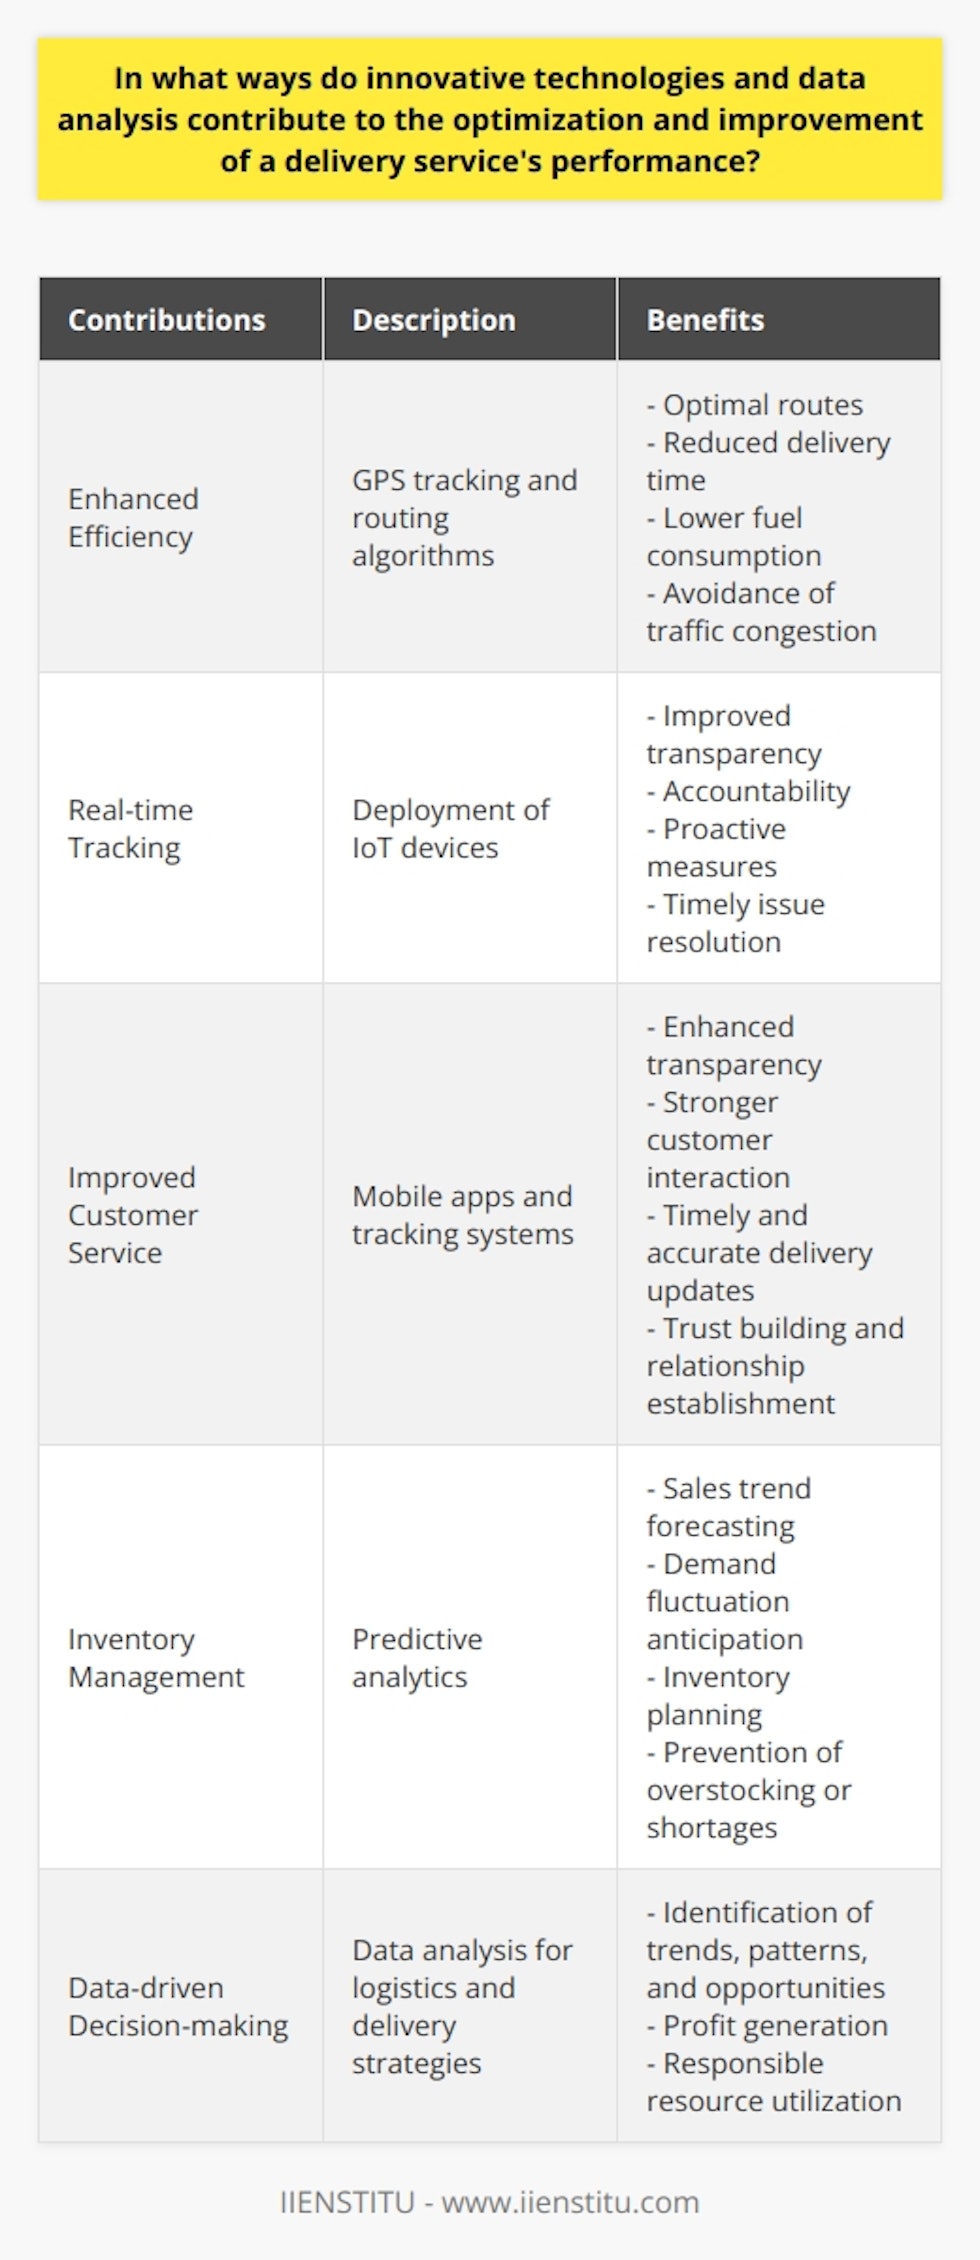 Innovative technologies and data analysis play a vital role in the optimization and improvement of a delivery service's performance in several ways.Firstly, these technologies enhance efficiency in delivery service performance. One such technology is GPS tracking, which allows real-time monitoring of vehicles and provides accurate information about their locations. This enables companies to select optimal routes, reducing delivery time and fuel consumption. Additionally, routing algorithms help in choosing the most time-efficient paths and avoiding traffic congestion, further improving efficiency.Secondly, the deployment of IoT devices in delivery vehicles allows for real-time tracking and monitoring. This technology enables companies to track the movement of their vehicles, ensuring transparency and accountability. It also facilitates proactive measures in case of delays or misplacements, allowing immediate actions to resolve issues and maintain service quality.Furthermore, modern technologies contribute to improved customer service. Mobile apps and tracking systems enable customers to track their deliveries and receive up-to-date information regarding their orders. This not only enhances transparency but also strengthens customer interaction. By providing timely and accurate delivery updates, businesses can build trust and establish robust relationships with their customers.Data analysis also plays a crucial role in inventory management for delivery services. Through predictive analytics, businesses can forecast sales trends and anticipate demand fluctuations. This helps in inventory planning, preventing overstocking or shortages. By maintaining a balance between supply and demand, companies can optimize their inventory and ensure efficient delivery operations.Additionally, the utilization of data-driven insights enables businesses to make strategic decisions regarding logistics and delivery strategies. Analyzing massive amounts of data allows companies to identify trends, patterns, and opportunities for improvement. By adjusting their operations based on these insights, businesses can generate more profits and ensure responsible resource utilization.In conclusion, innovative technologies and data analysis are invaluable when it comes to optimizing and improving delivery service performance. They streamline operations, improve transparency, foster customer relations, and support effective decision-making. By strategically deploying these tools, delivery service providers can stay ahead in the ever-evolving industry and deliver superior service to their customers.